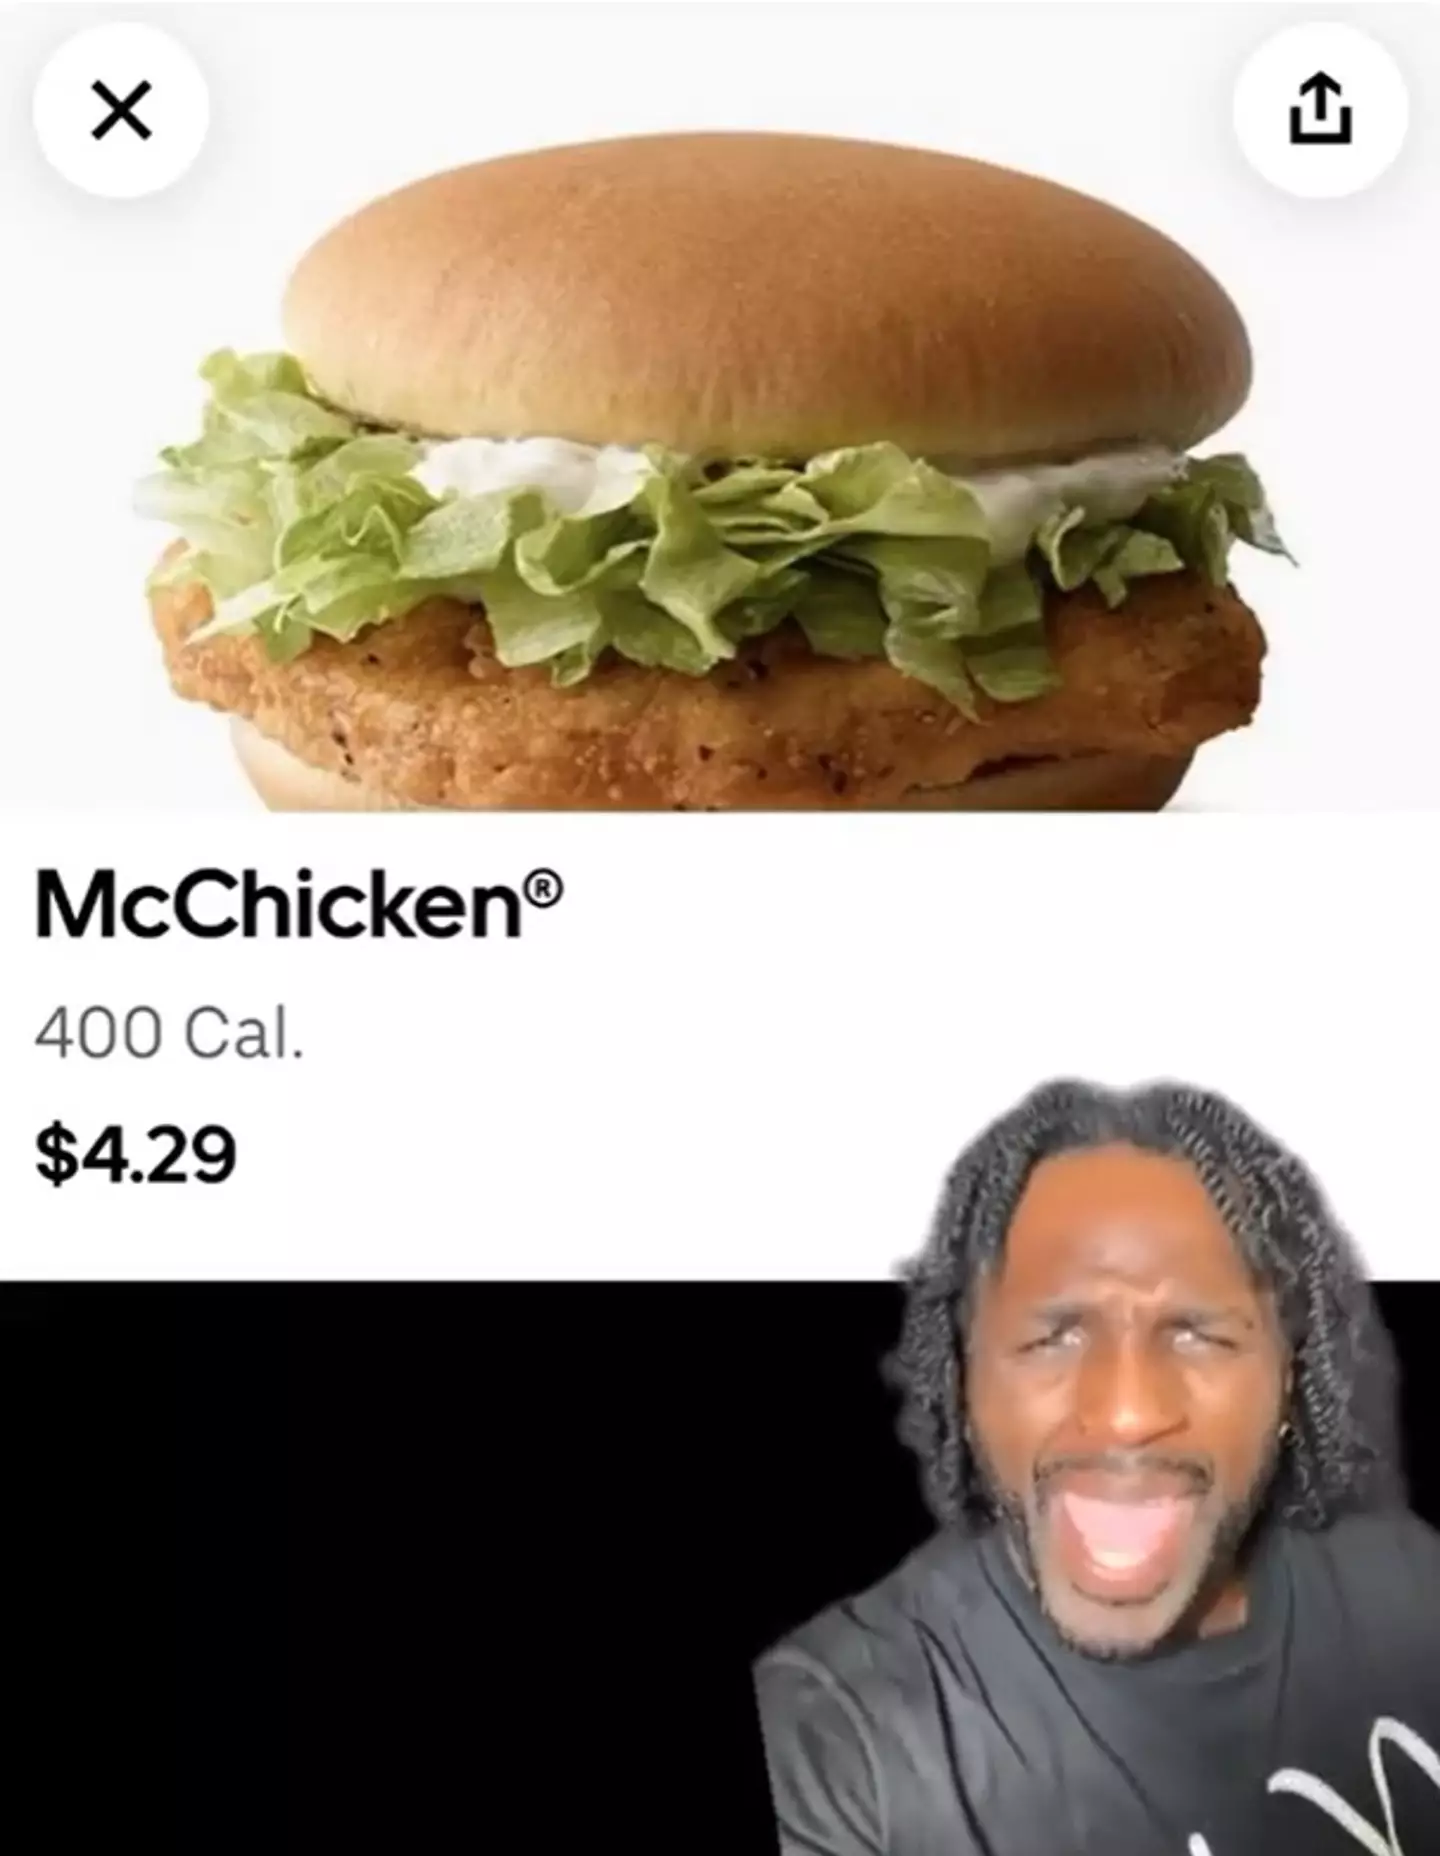 The comedian couldn't believe how expensive McDonald's had become.